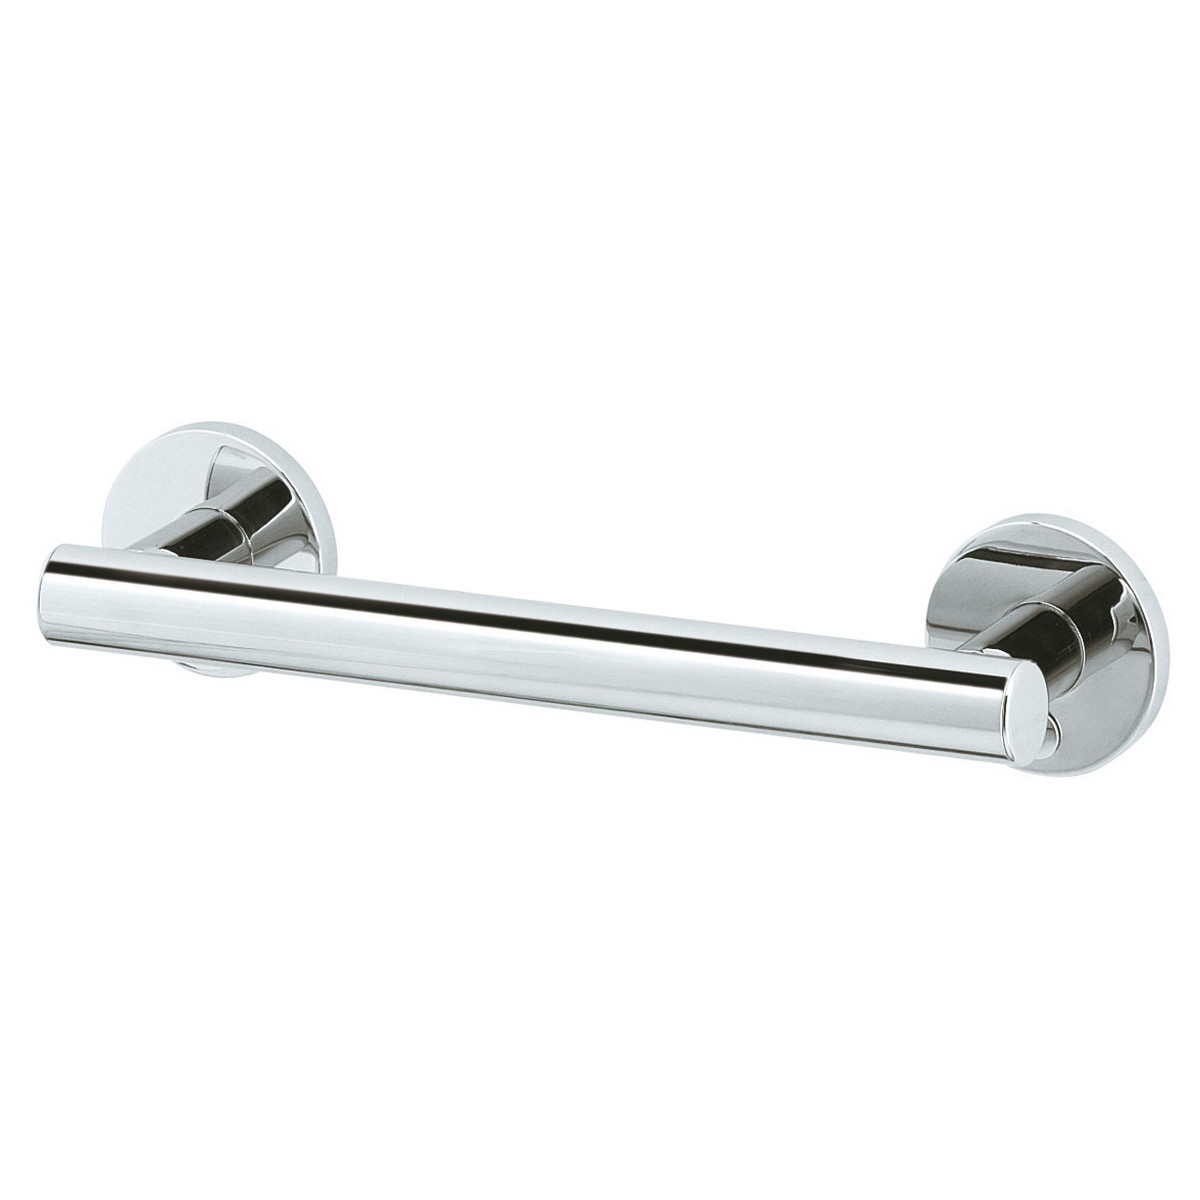 KEUCO 35901011800 PLAN CARE 18 INCH WALL MOUNTED SUPPORT RAIL IN POLISHED CHROME